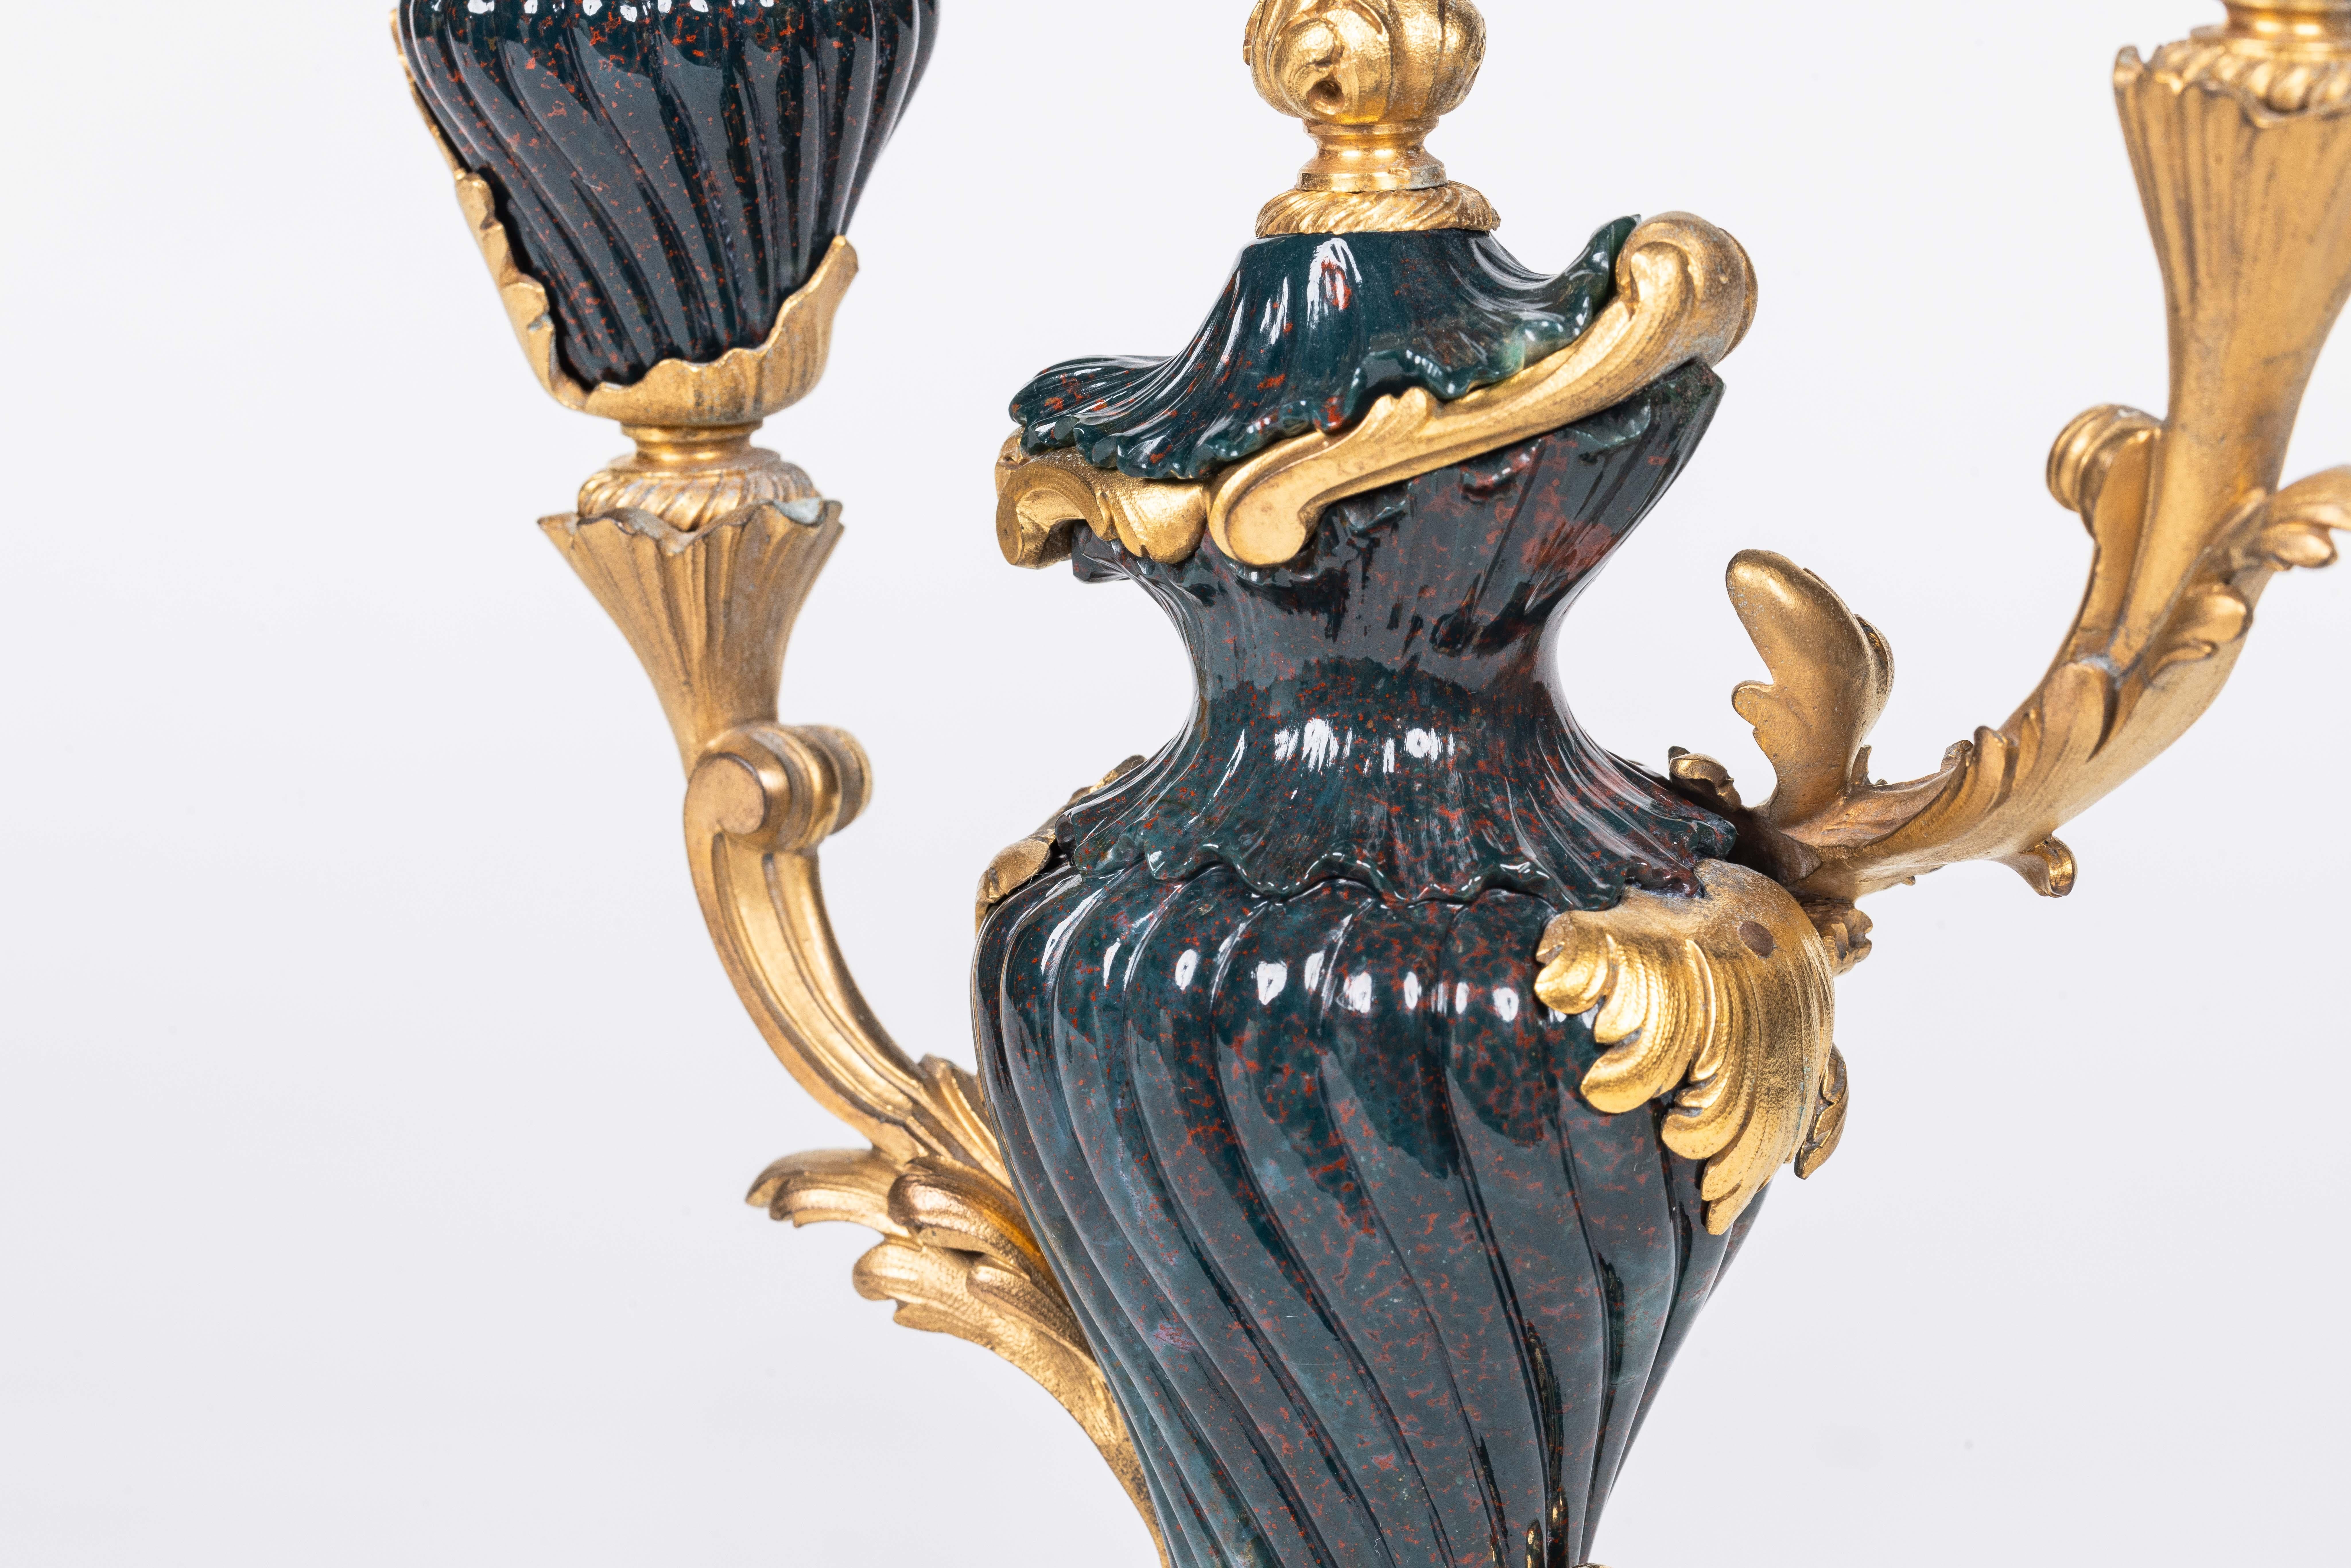 A Rare Pair of Ormolu-Mounted Bloodstone Two-Light Candlesticks, Resting on Jasper Bases, Circa 1790

Transport yourself to the pinnacle of historical elegance with this extraordinary discovery - a truly rare and exquisite pair of ormolu mounted